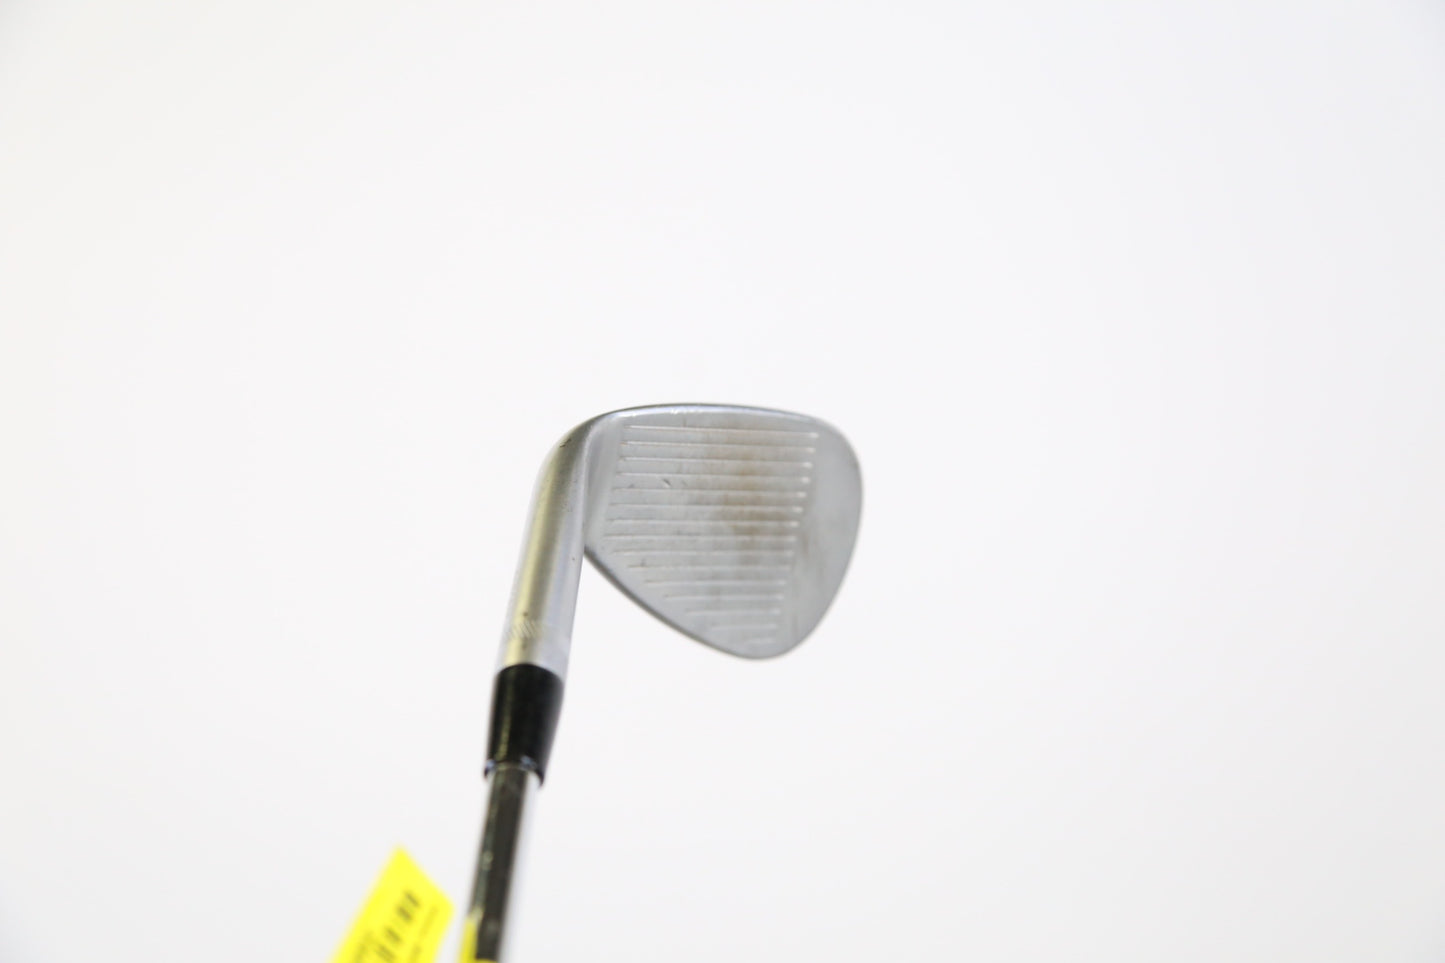 Used Titleist Vokey Spin Milled Chrome C-C Lob Wedge - Right-Handed - 58 Degrees - Stiff Flex